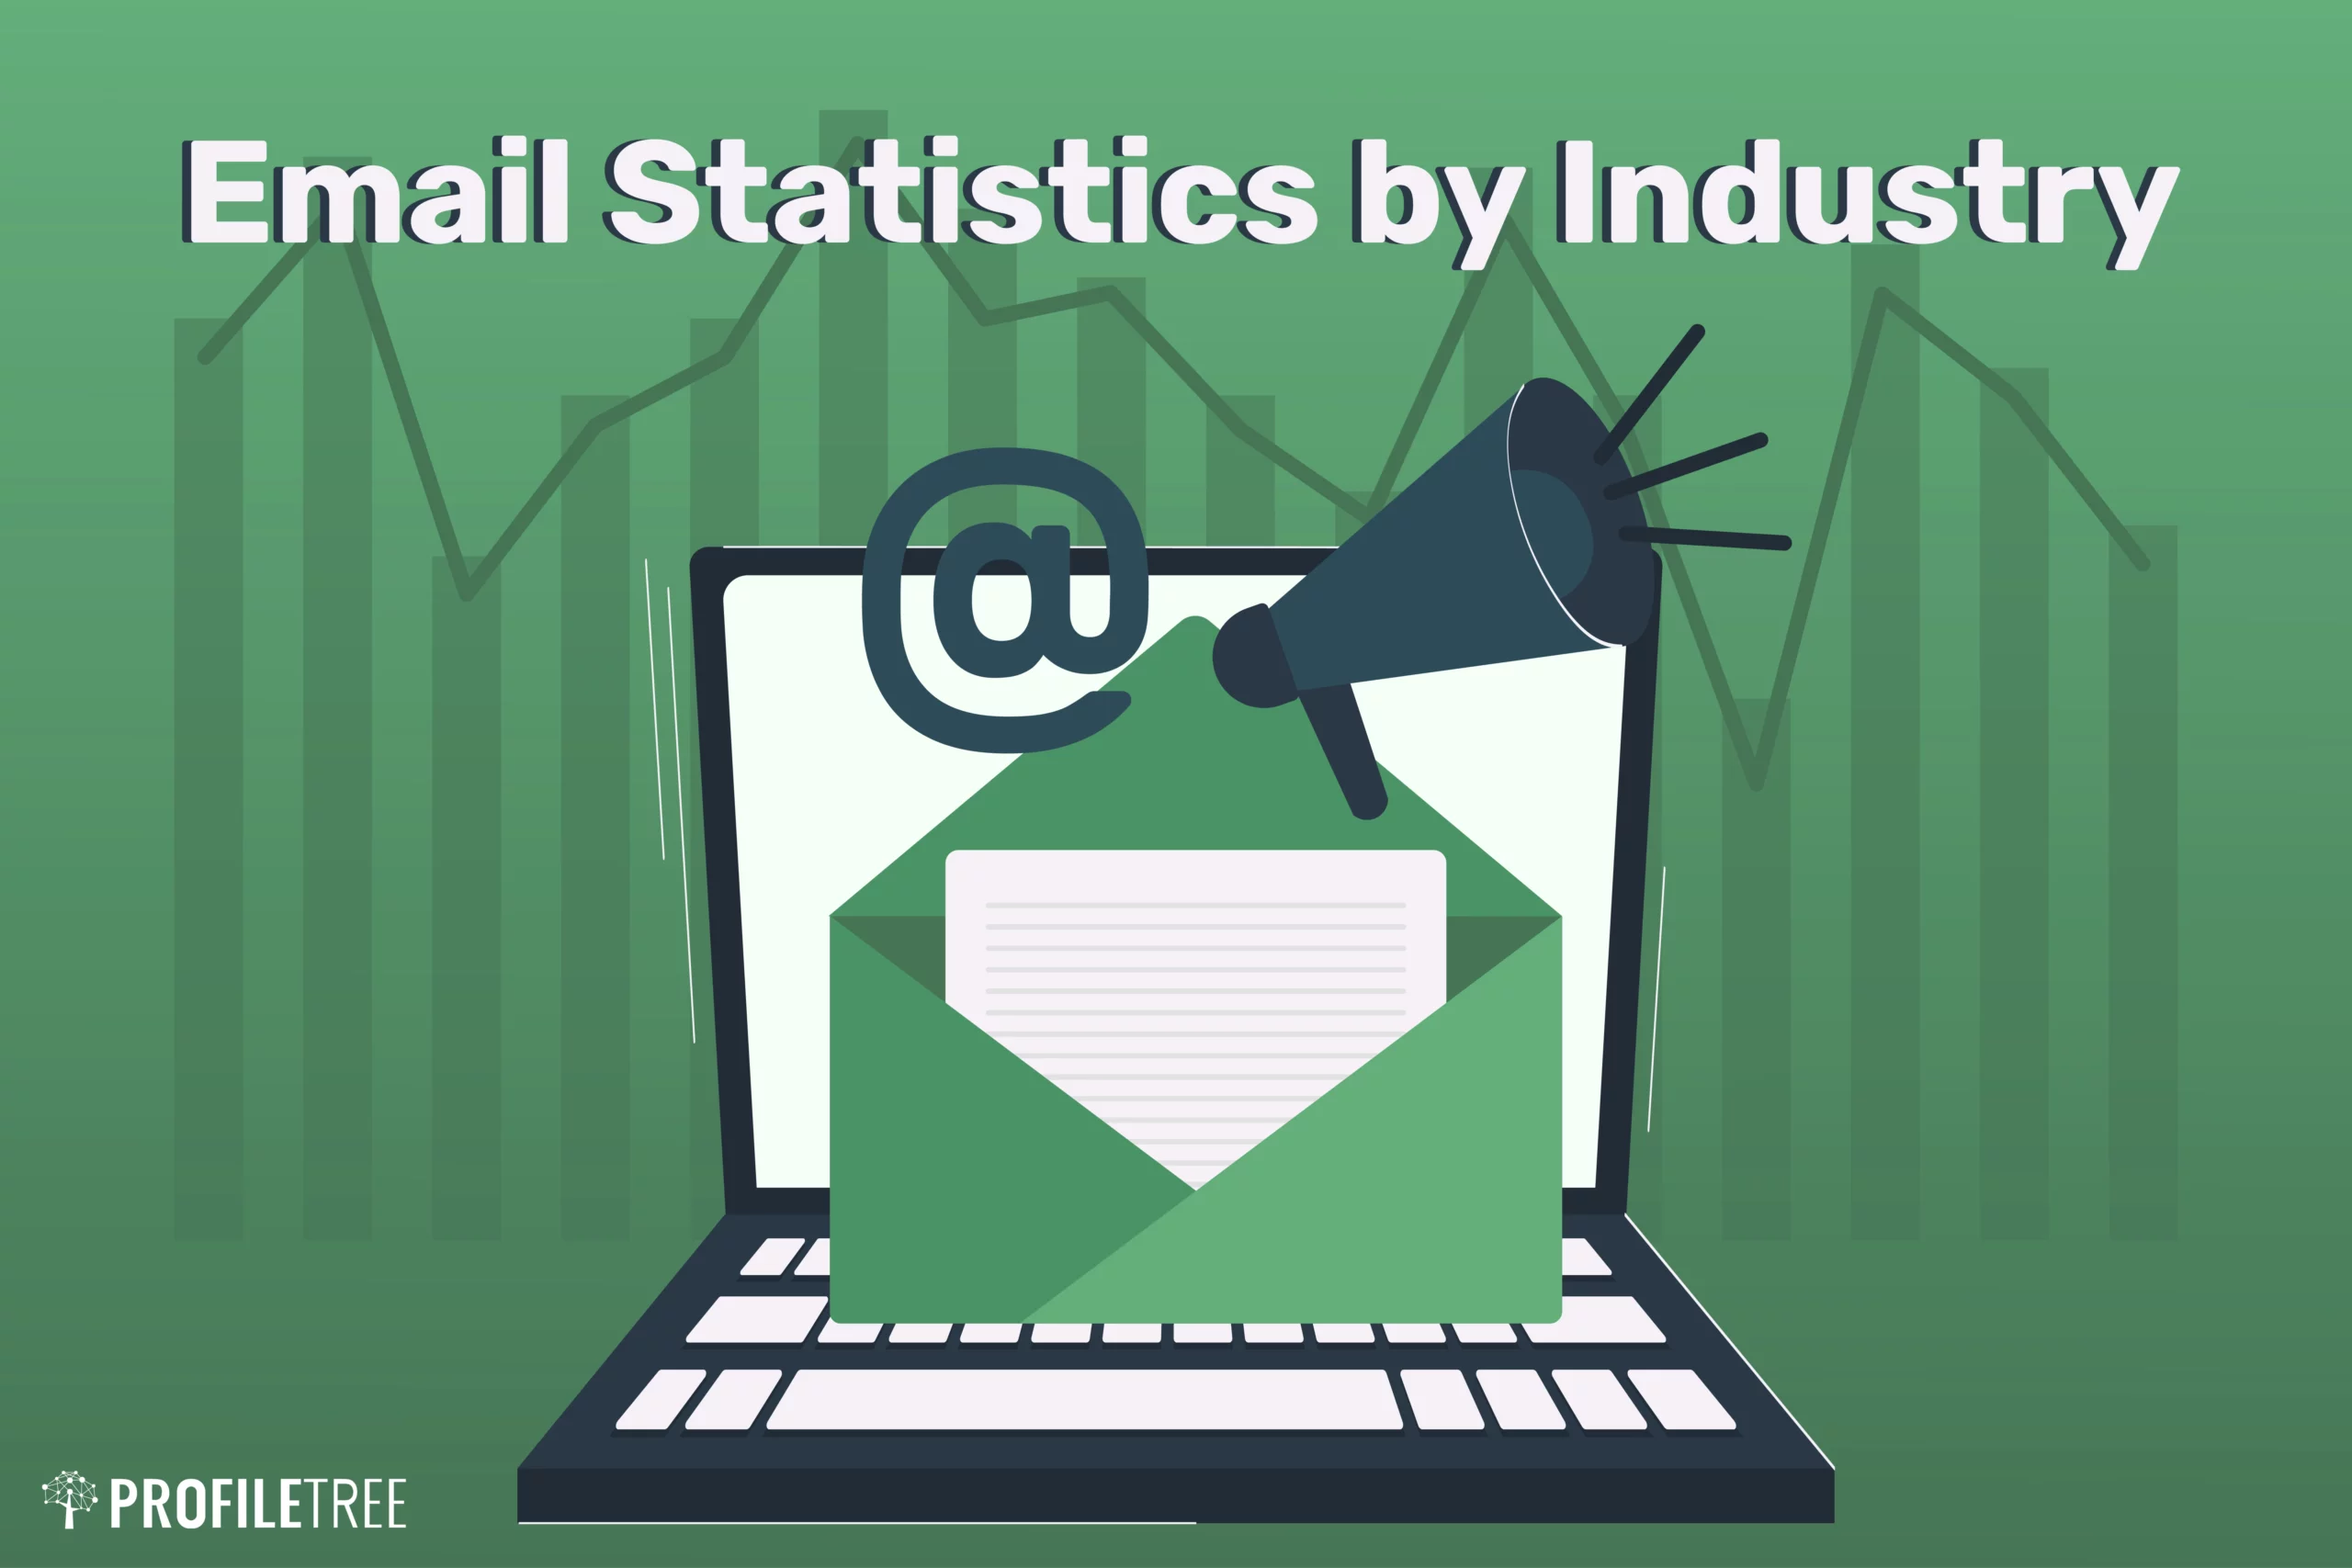 Email Statistics by Industry